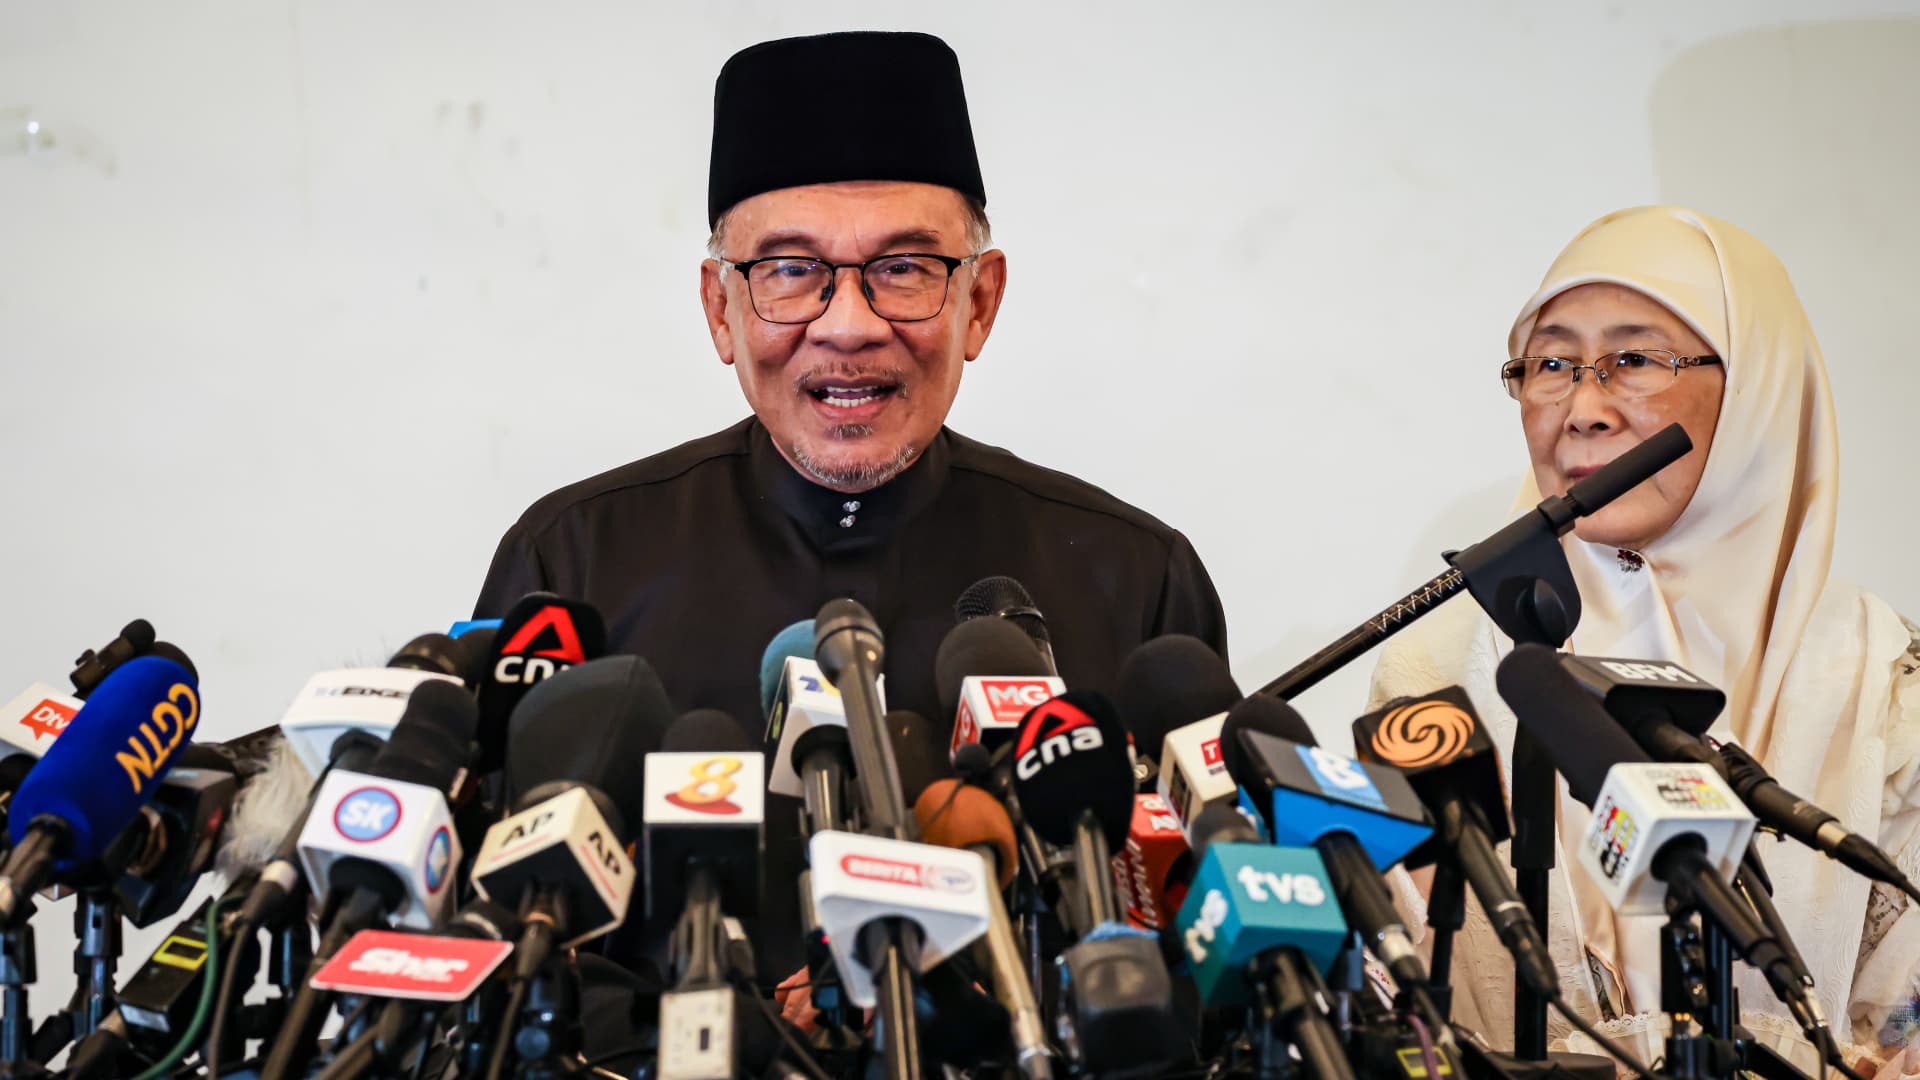 Malaysia's new prime minister Anwar Ibrahim vows to unify the country and fight corruption